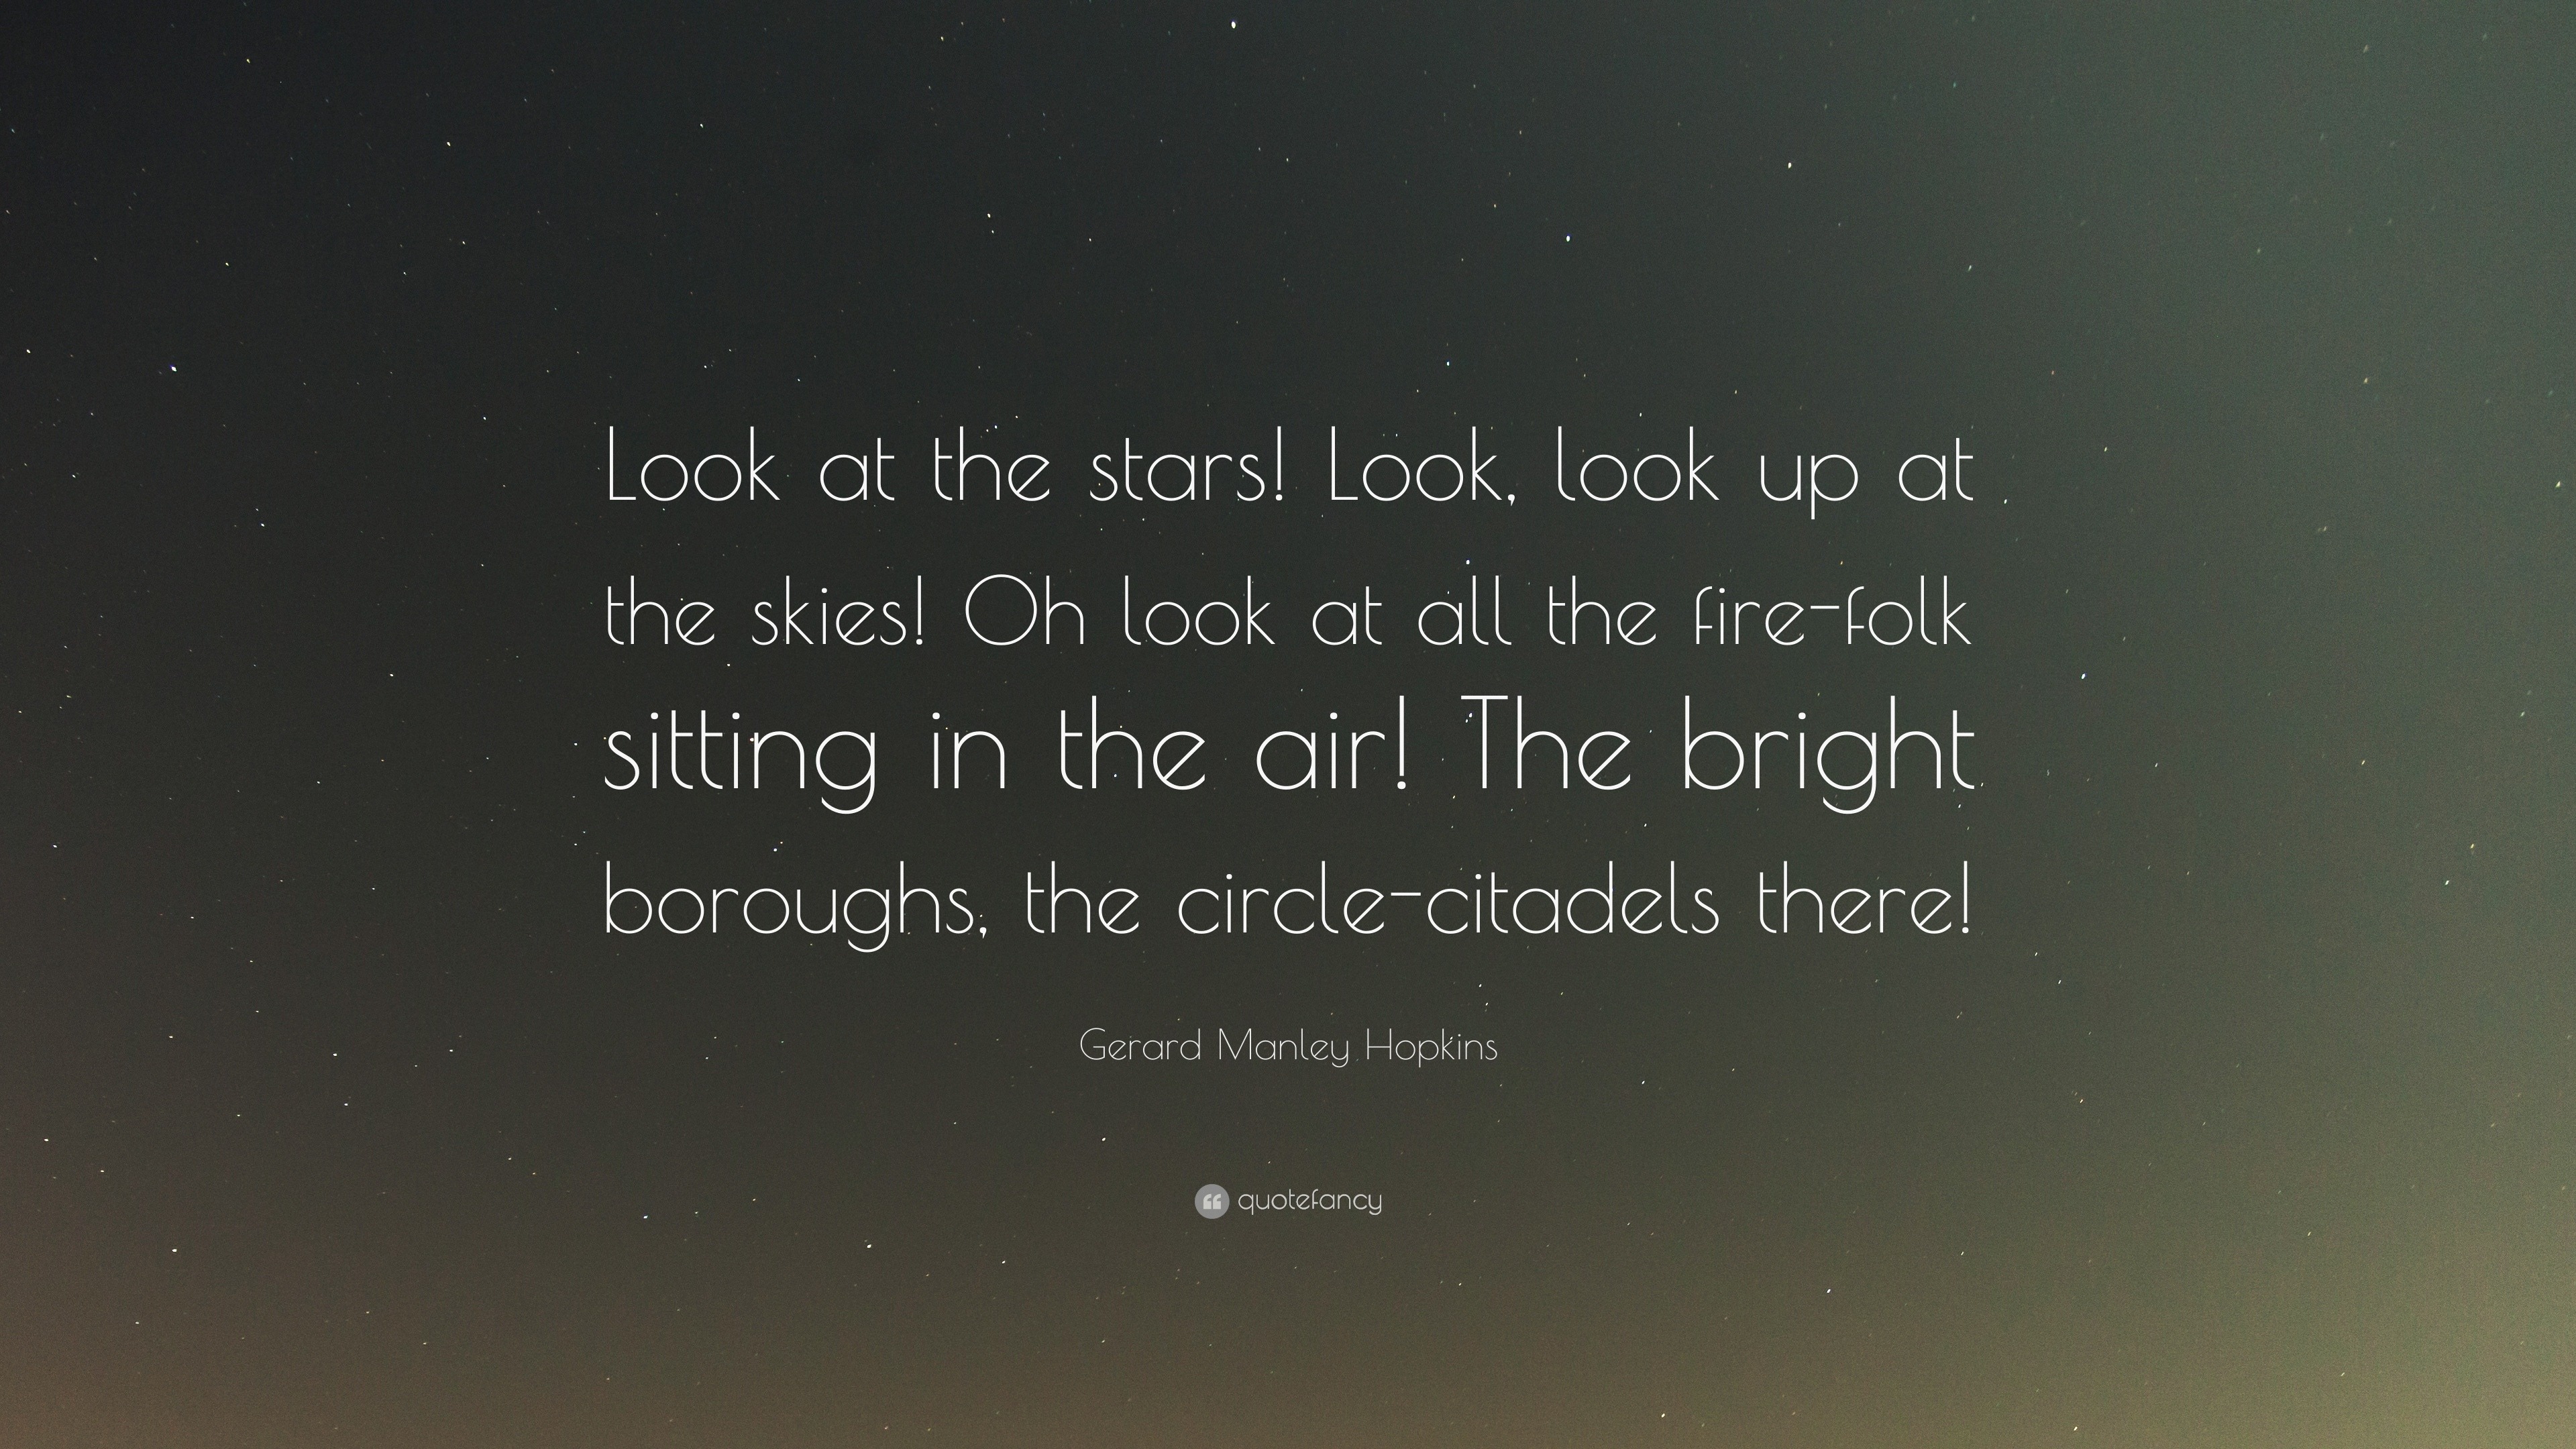 Gerard Manley Hopkins Quote Look At The Stars Look Look Up At The Skies Oh Look At All The Fire Folk Sitting In The Air The Bright Boroughs The